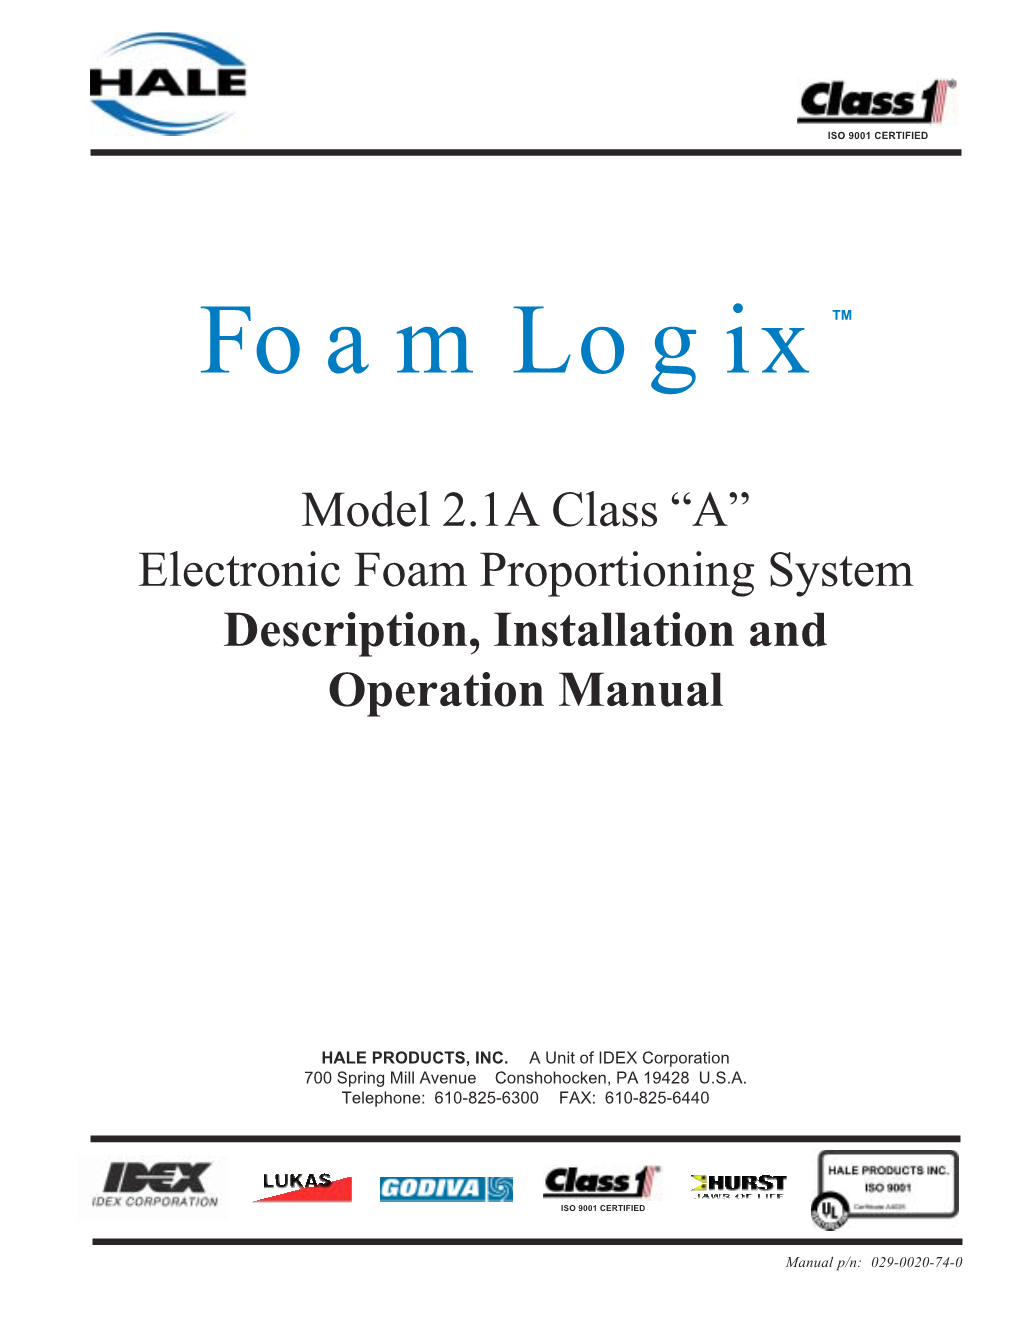 Model 2.1A Class “A” Electronic Foam Proportioning System Description, Installation and Operation Manual